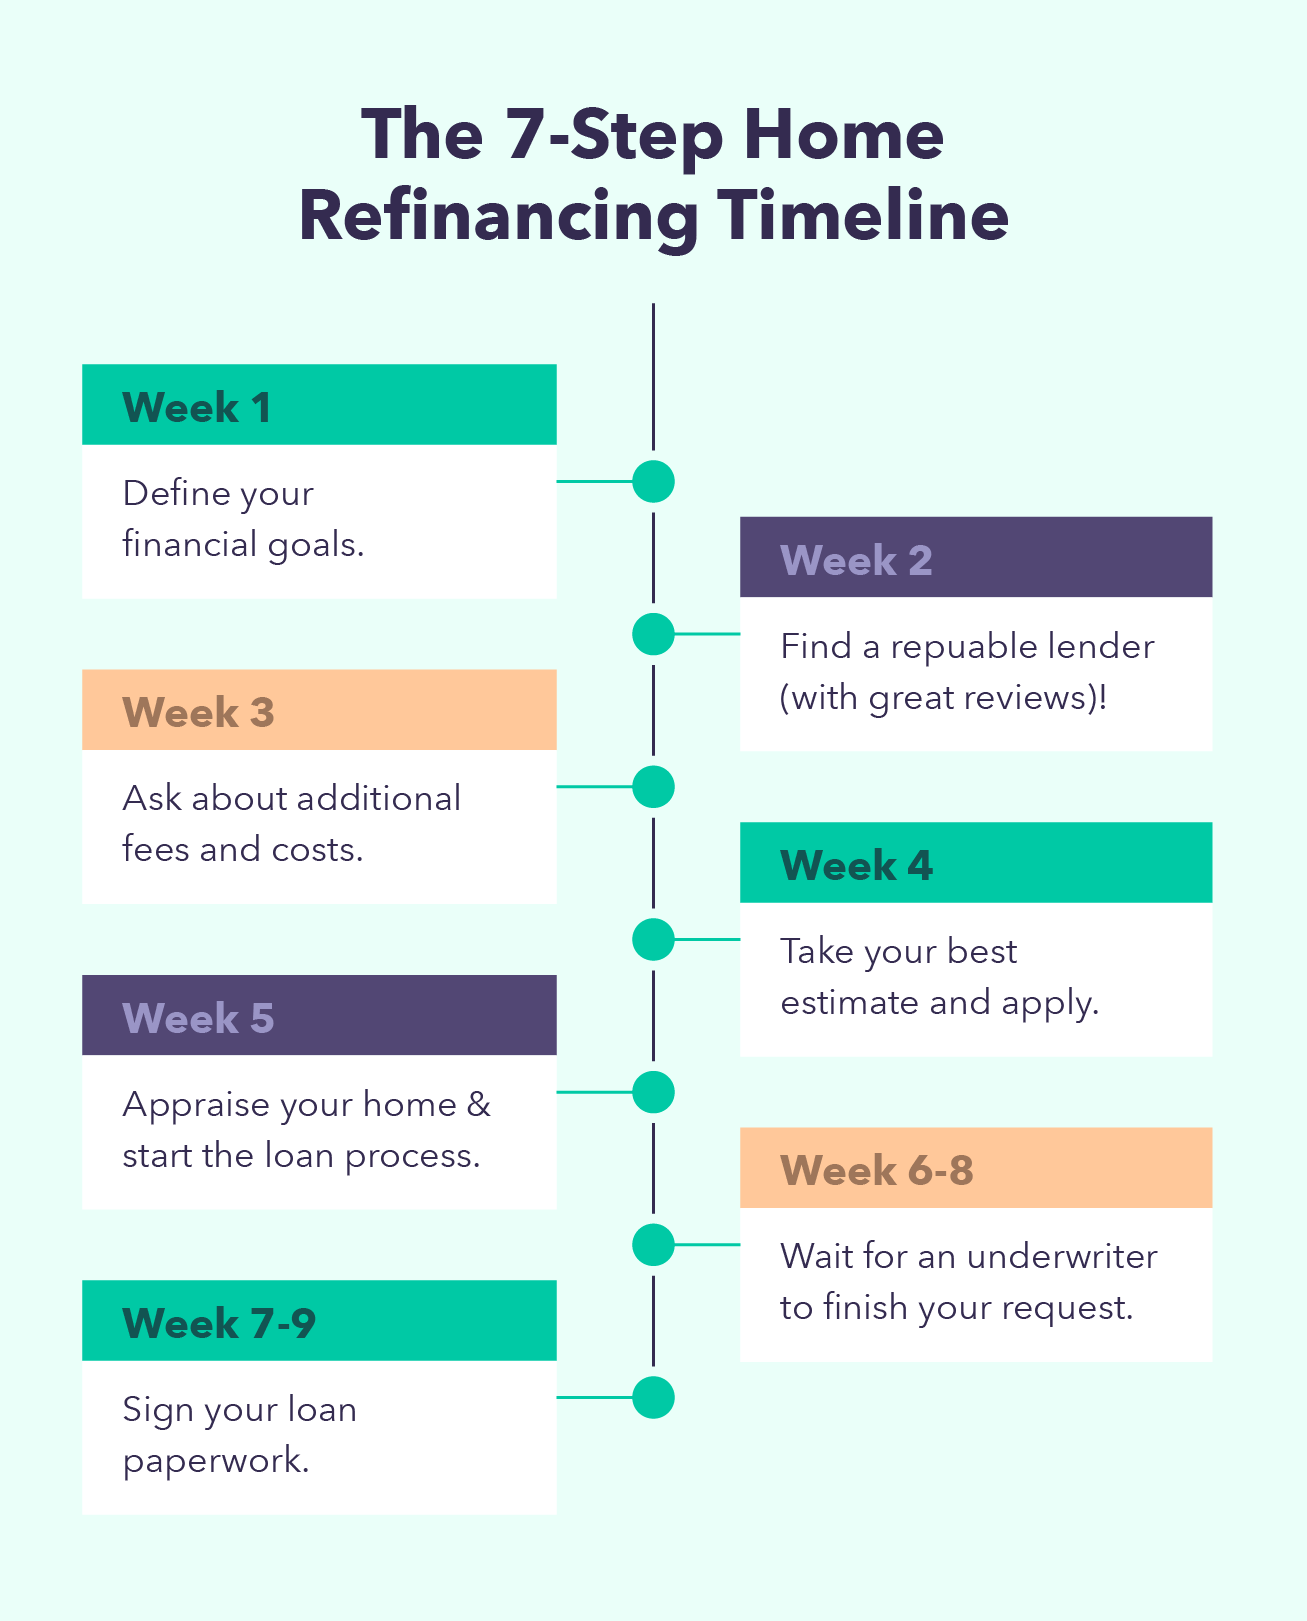 A timeline helps breakdown an answer to “how long does it take to refinance a house?”